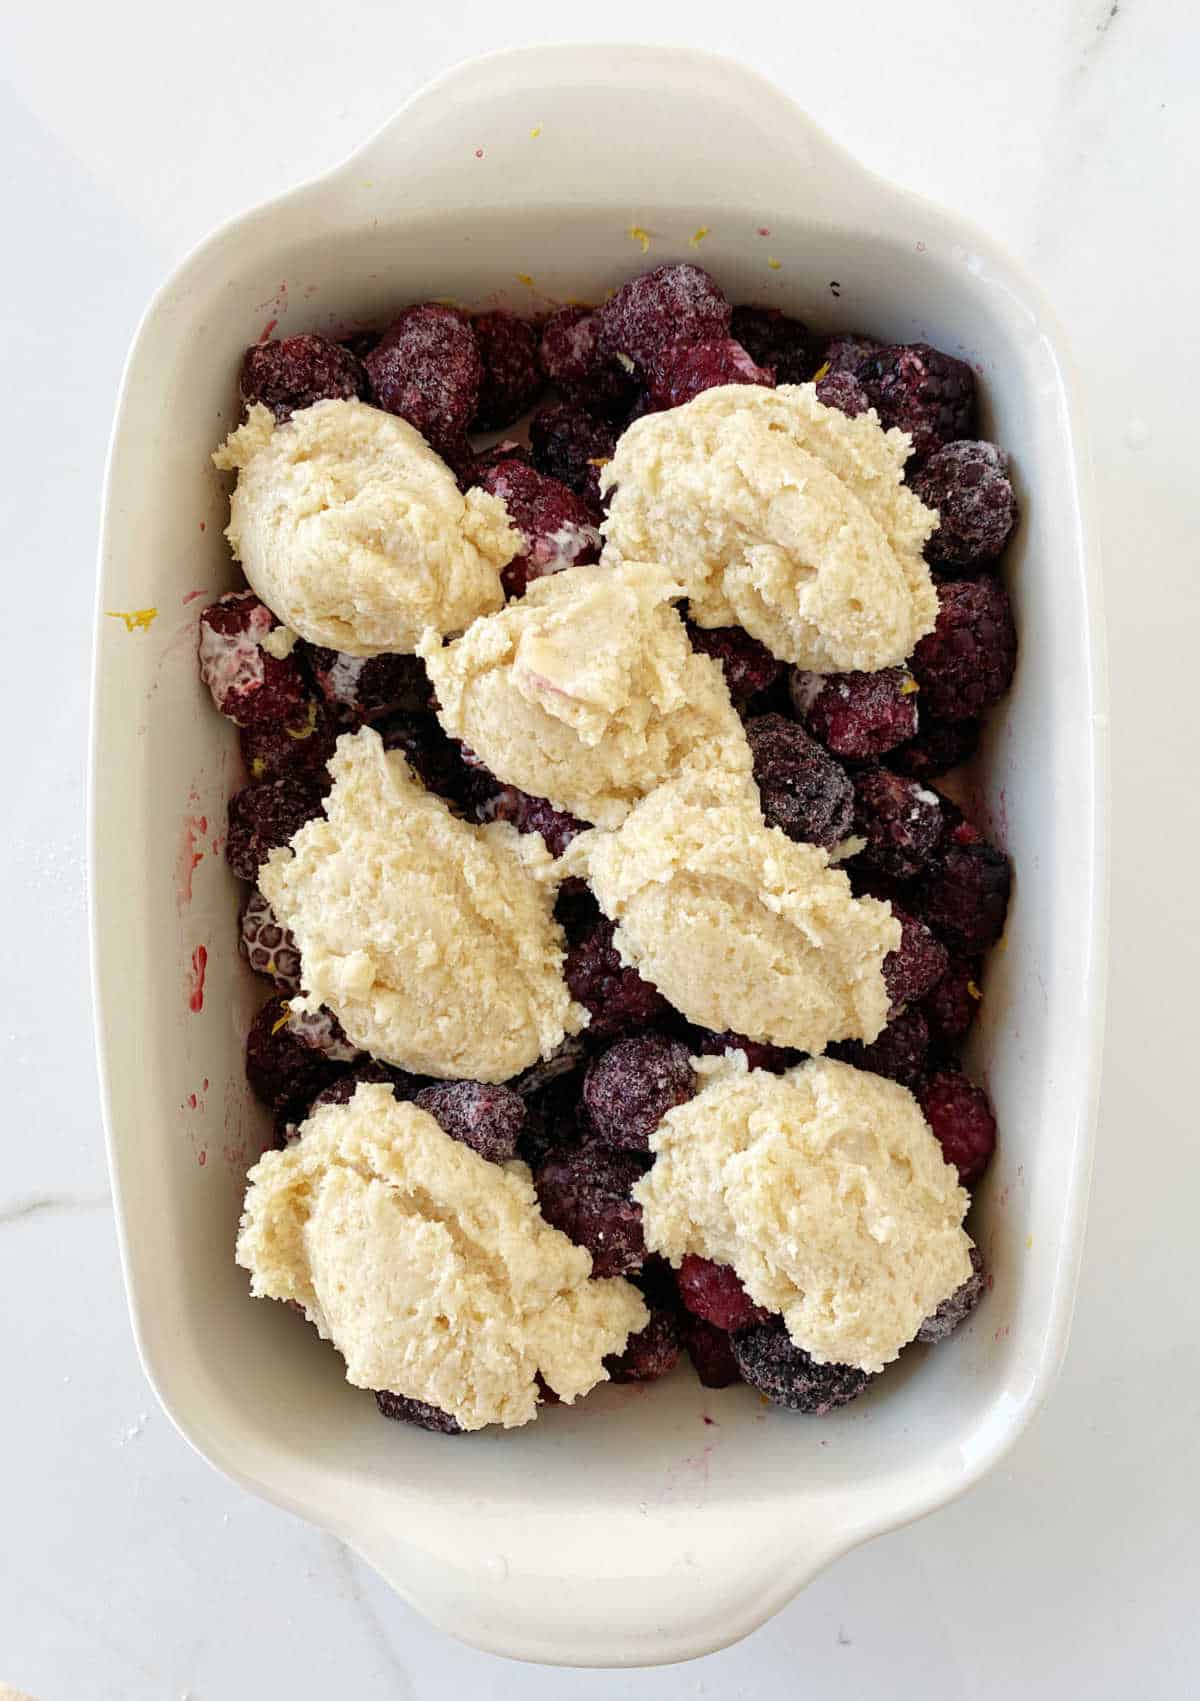 Top view of unbaked blackberry cobbler in beige ceramic dish on white surface